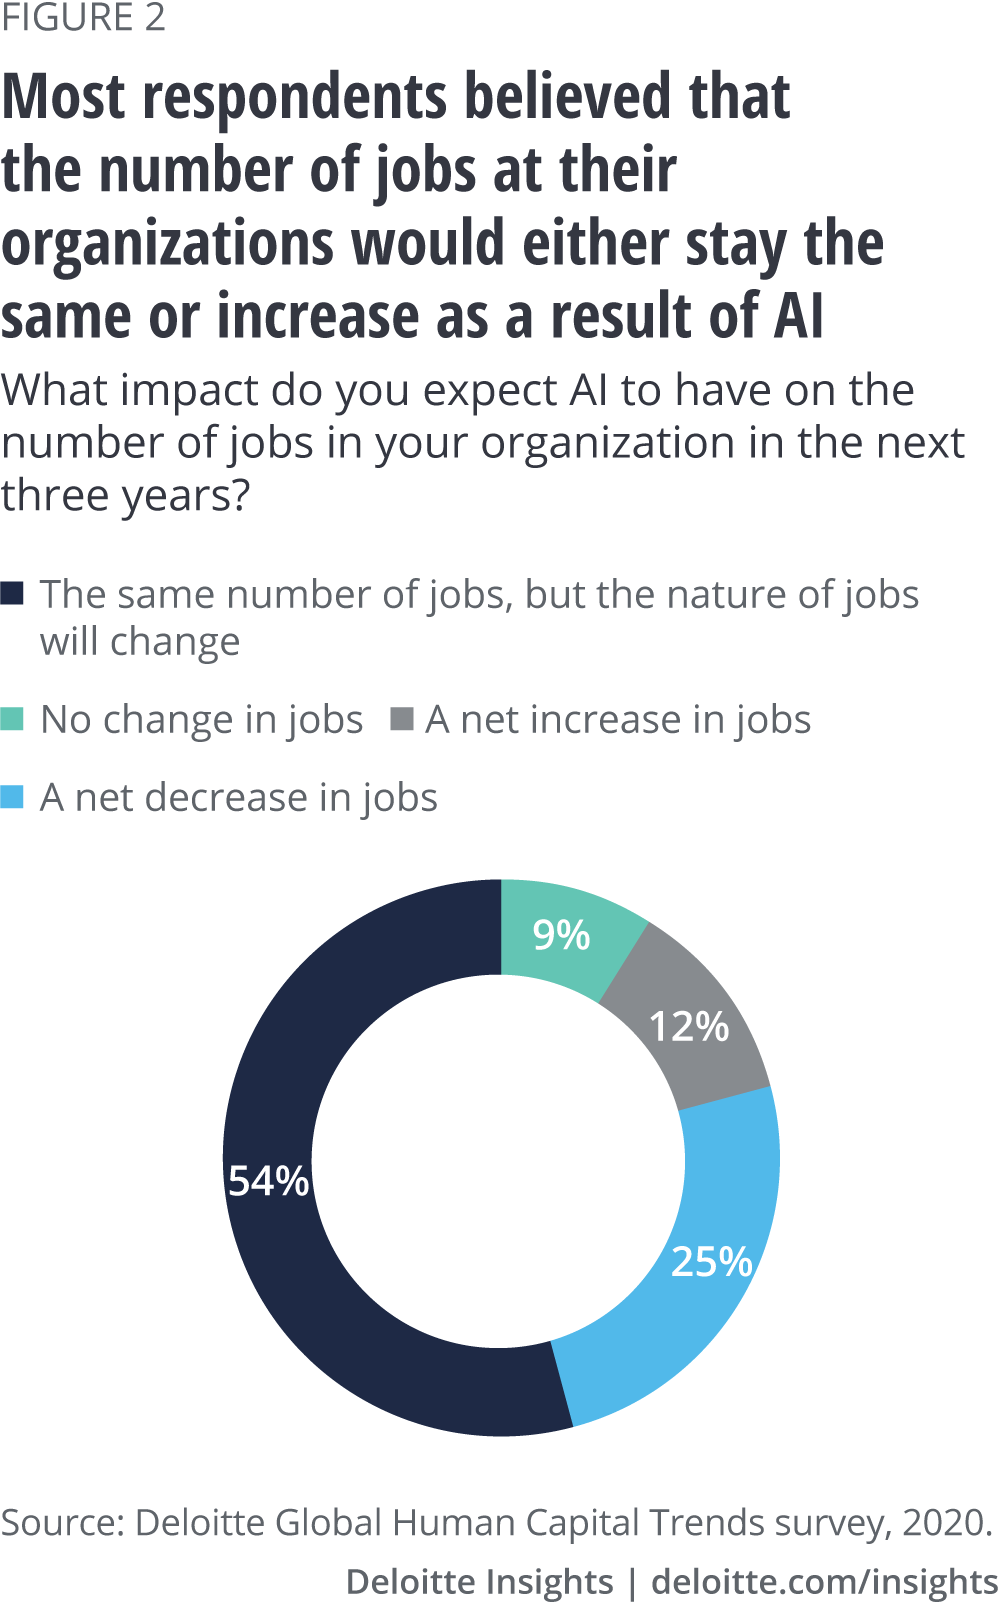 Most respondents believed that the number of jobs at their organizations would either stay the same or increase as a result of AI